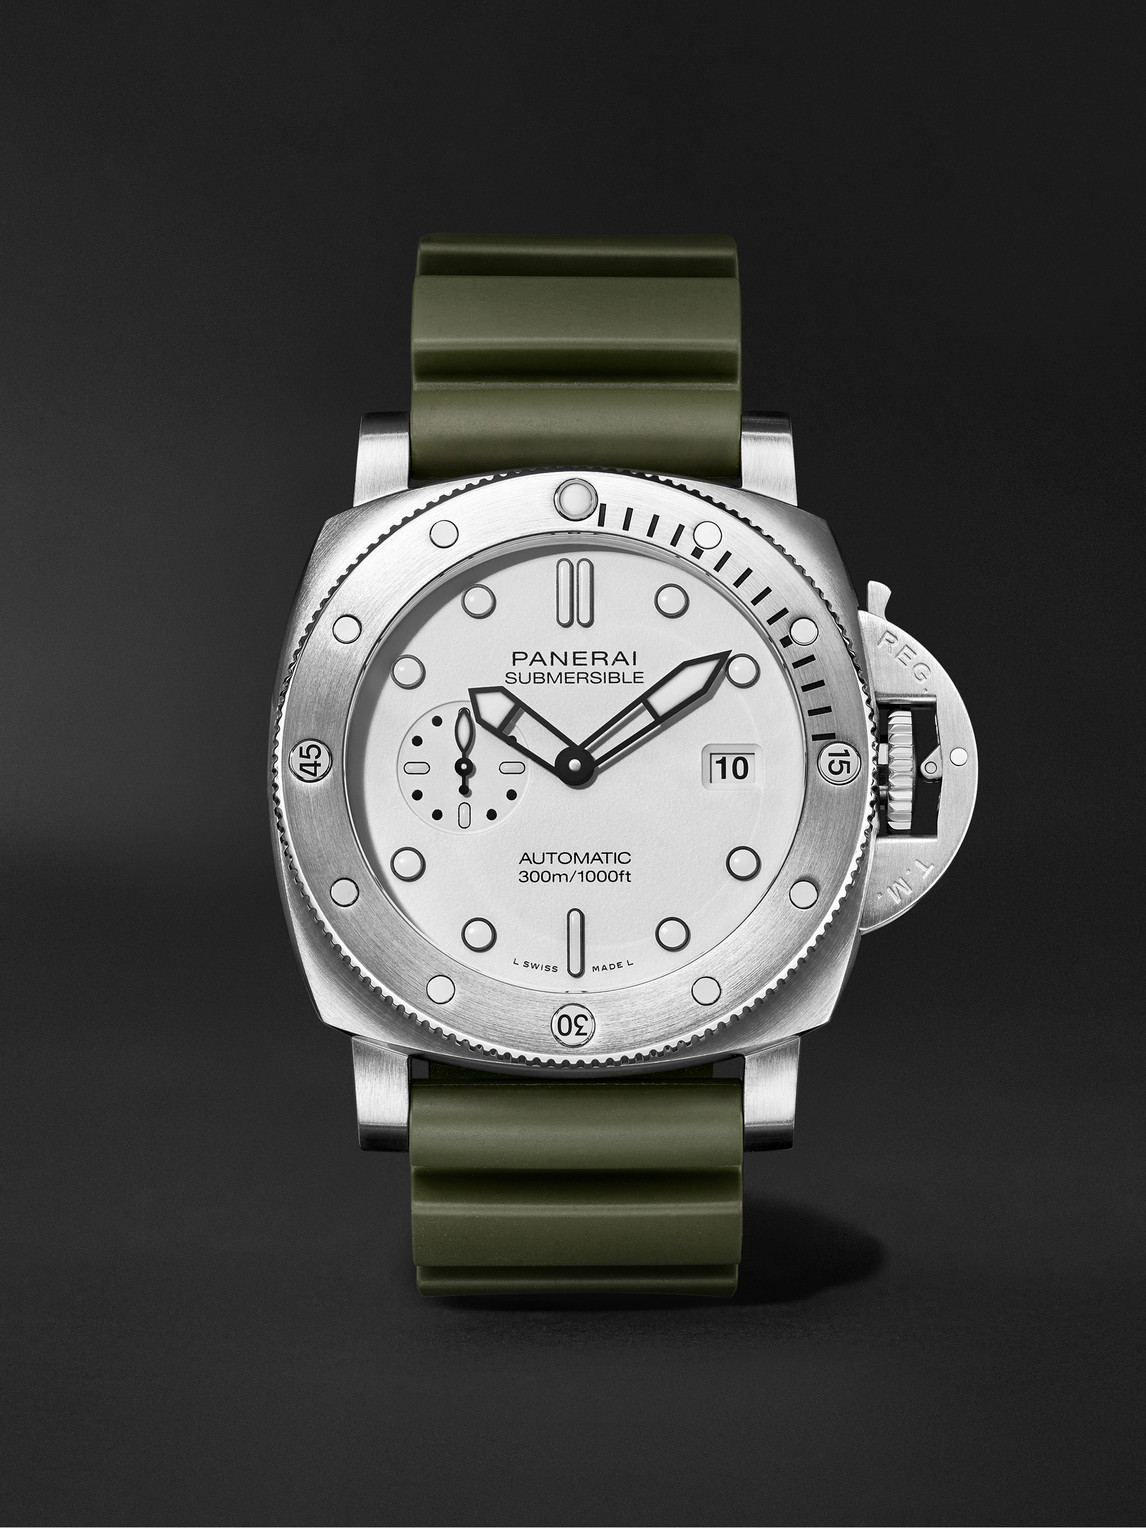 Submersible QuarantaQuattro Automatic 44mm Brushed Stainless Steel and Rubber Watch, Ref. No. PAM01226